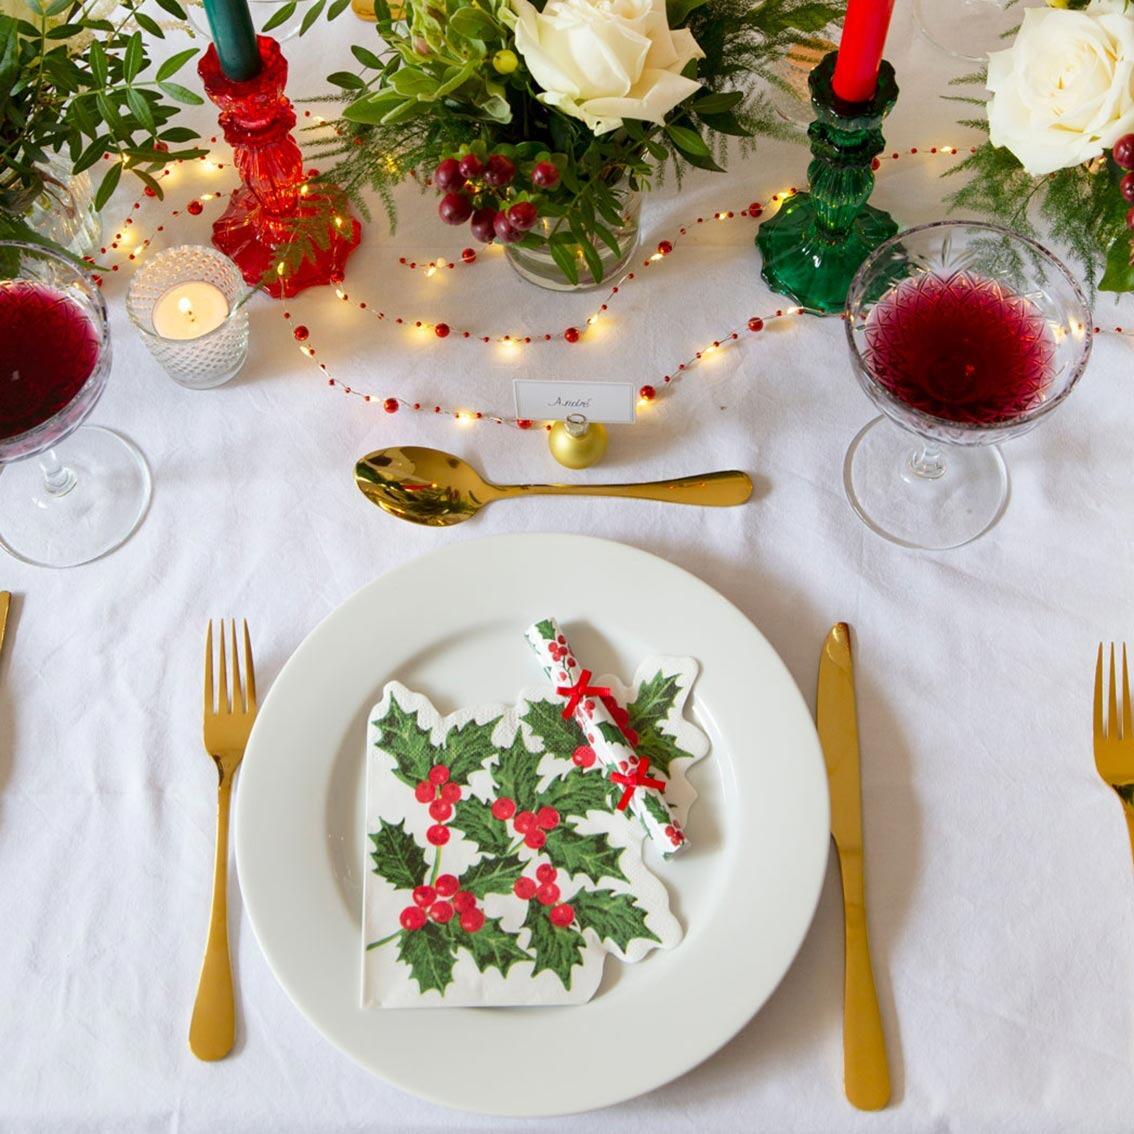 Christmas holly-shaped party napkins